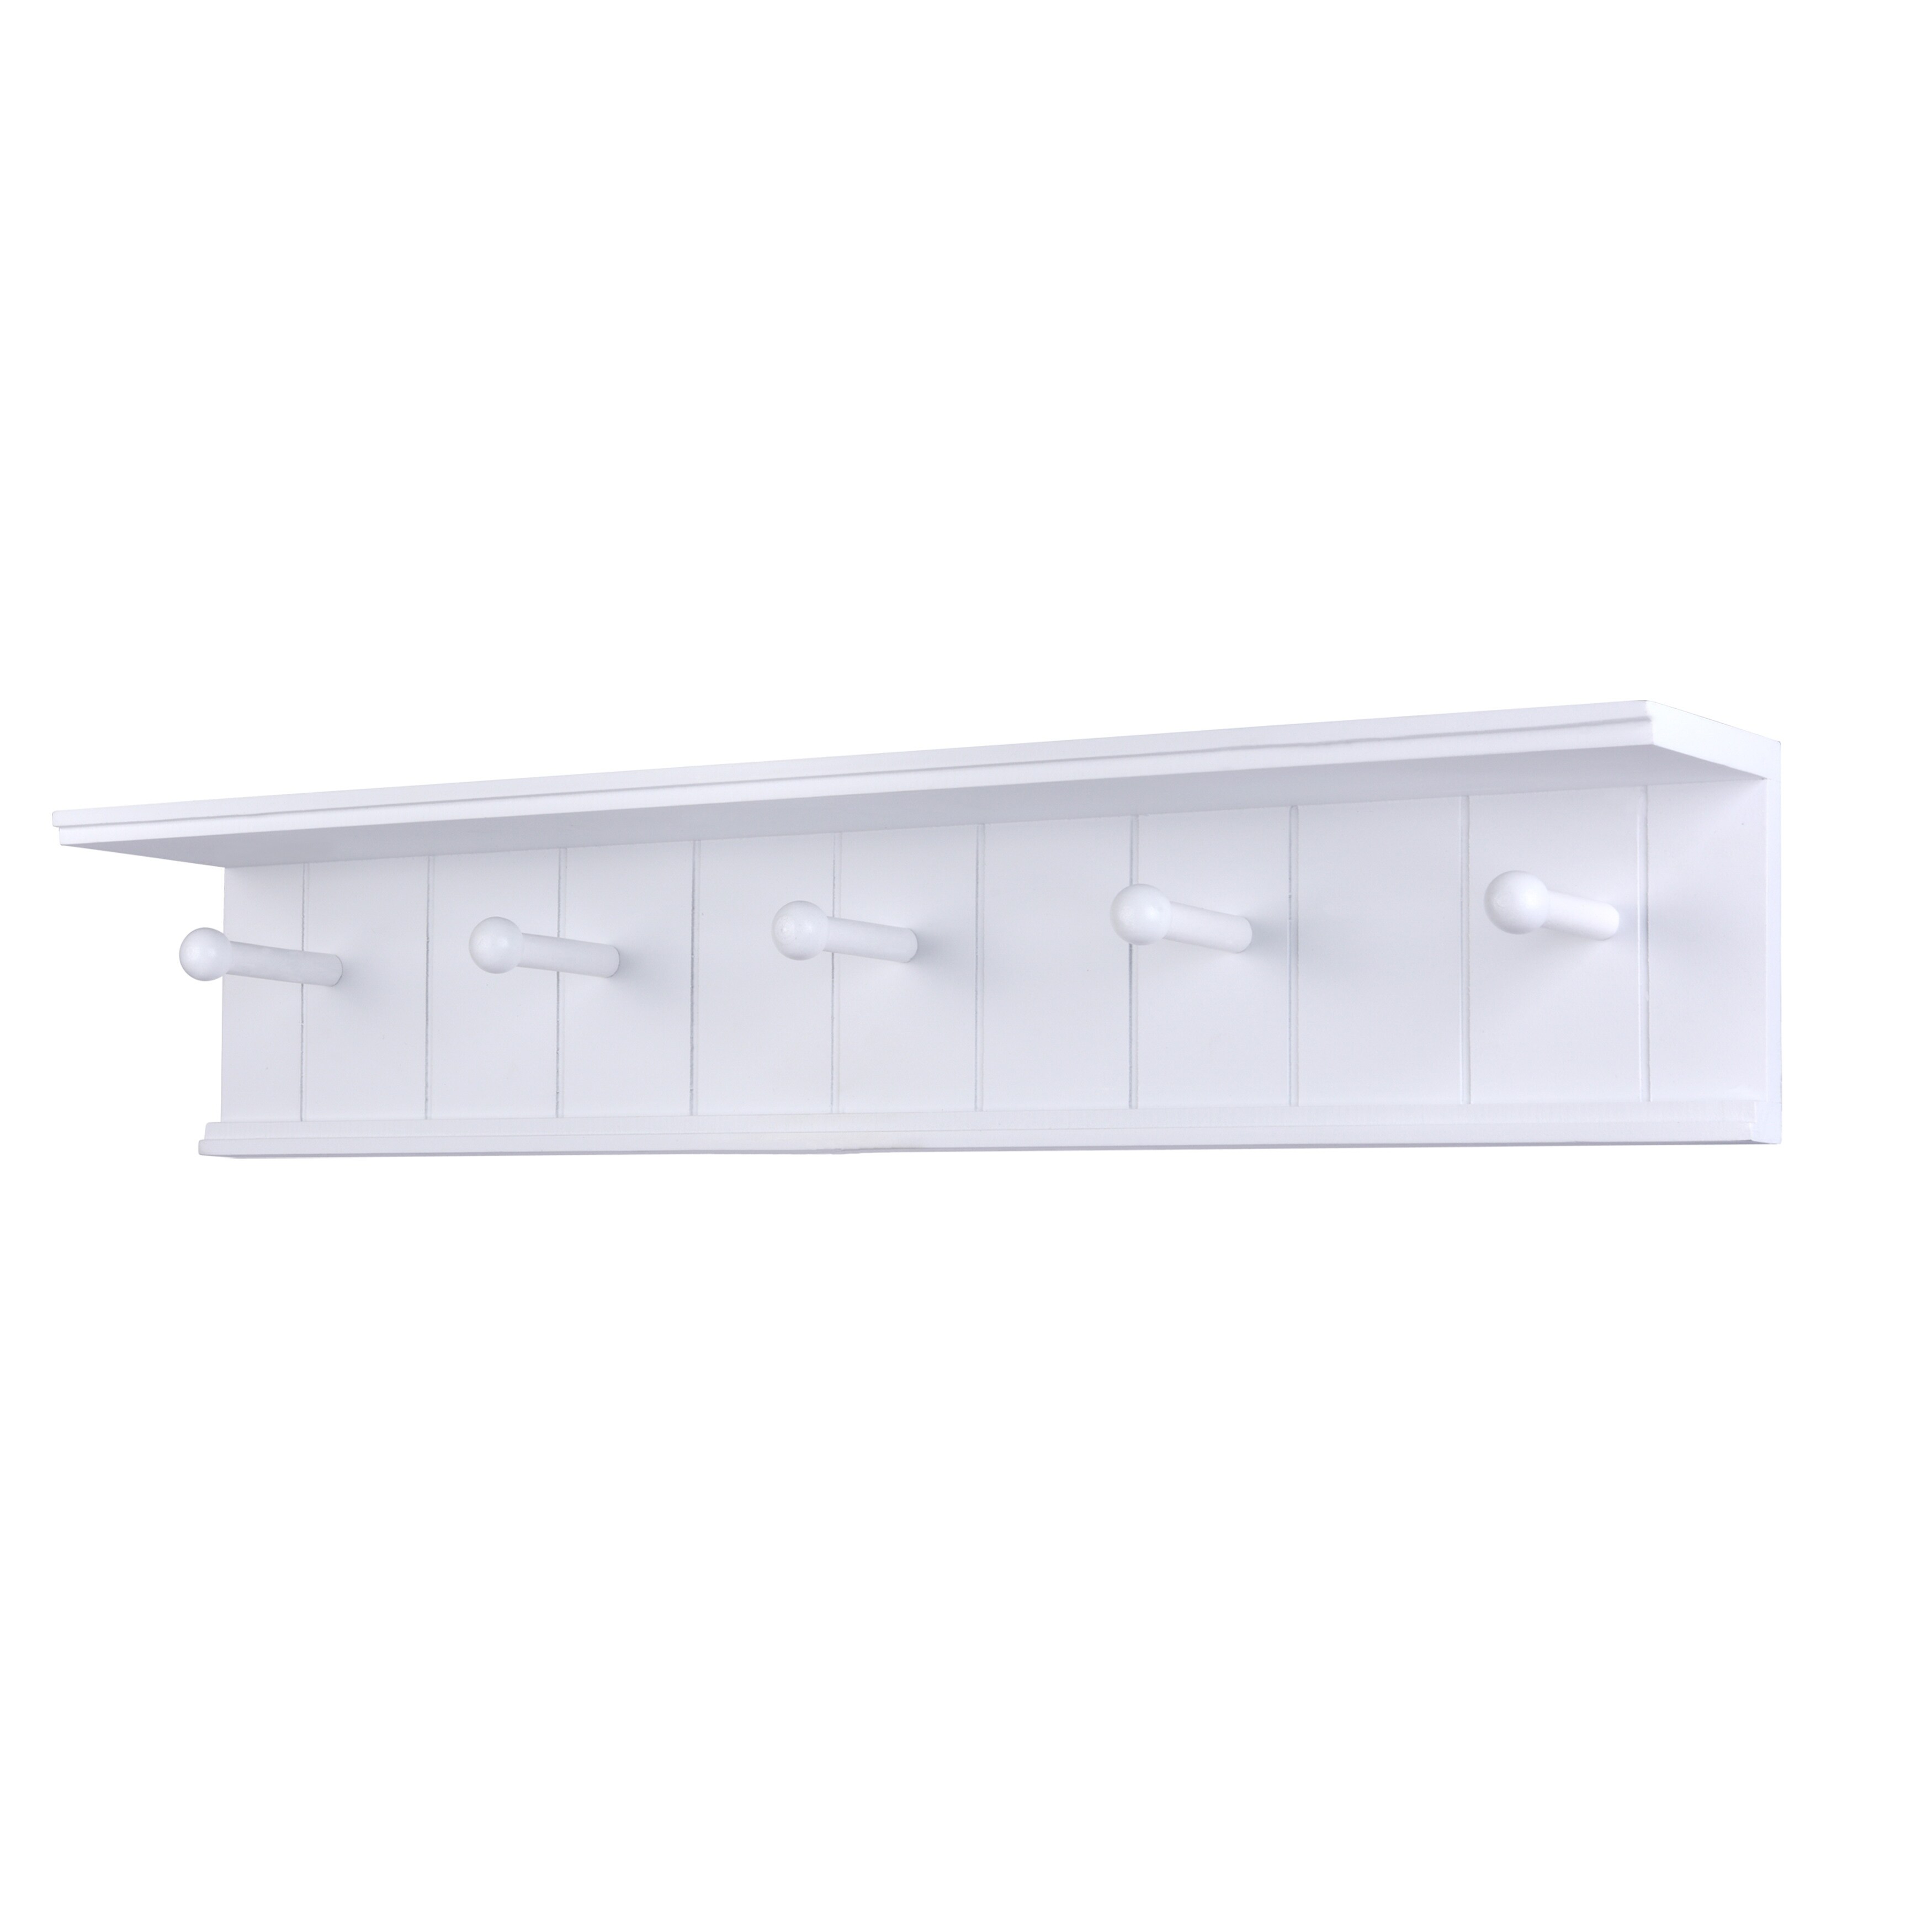 https://ak1.ostkcdn.com/images/products/26051519/Danya-B.-24-Wall-Mount-Wooden-Coat-Rack-with-5-Hanger-Hooks-and-Display-Shelf-White-N-A-2db83b81-596a-4b59-a6d7-f602edd1eb59.jpg